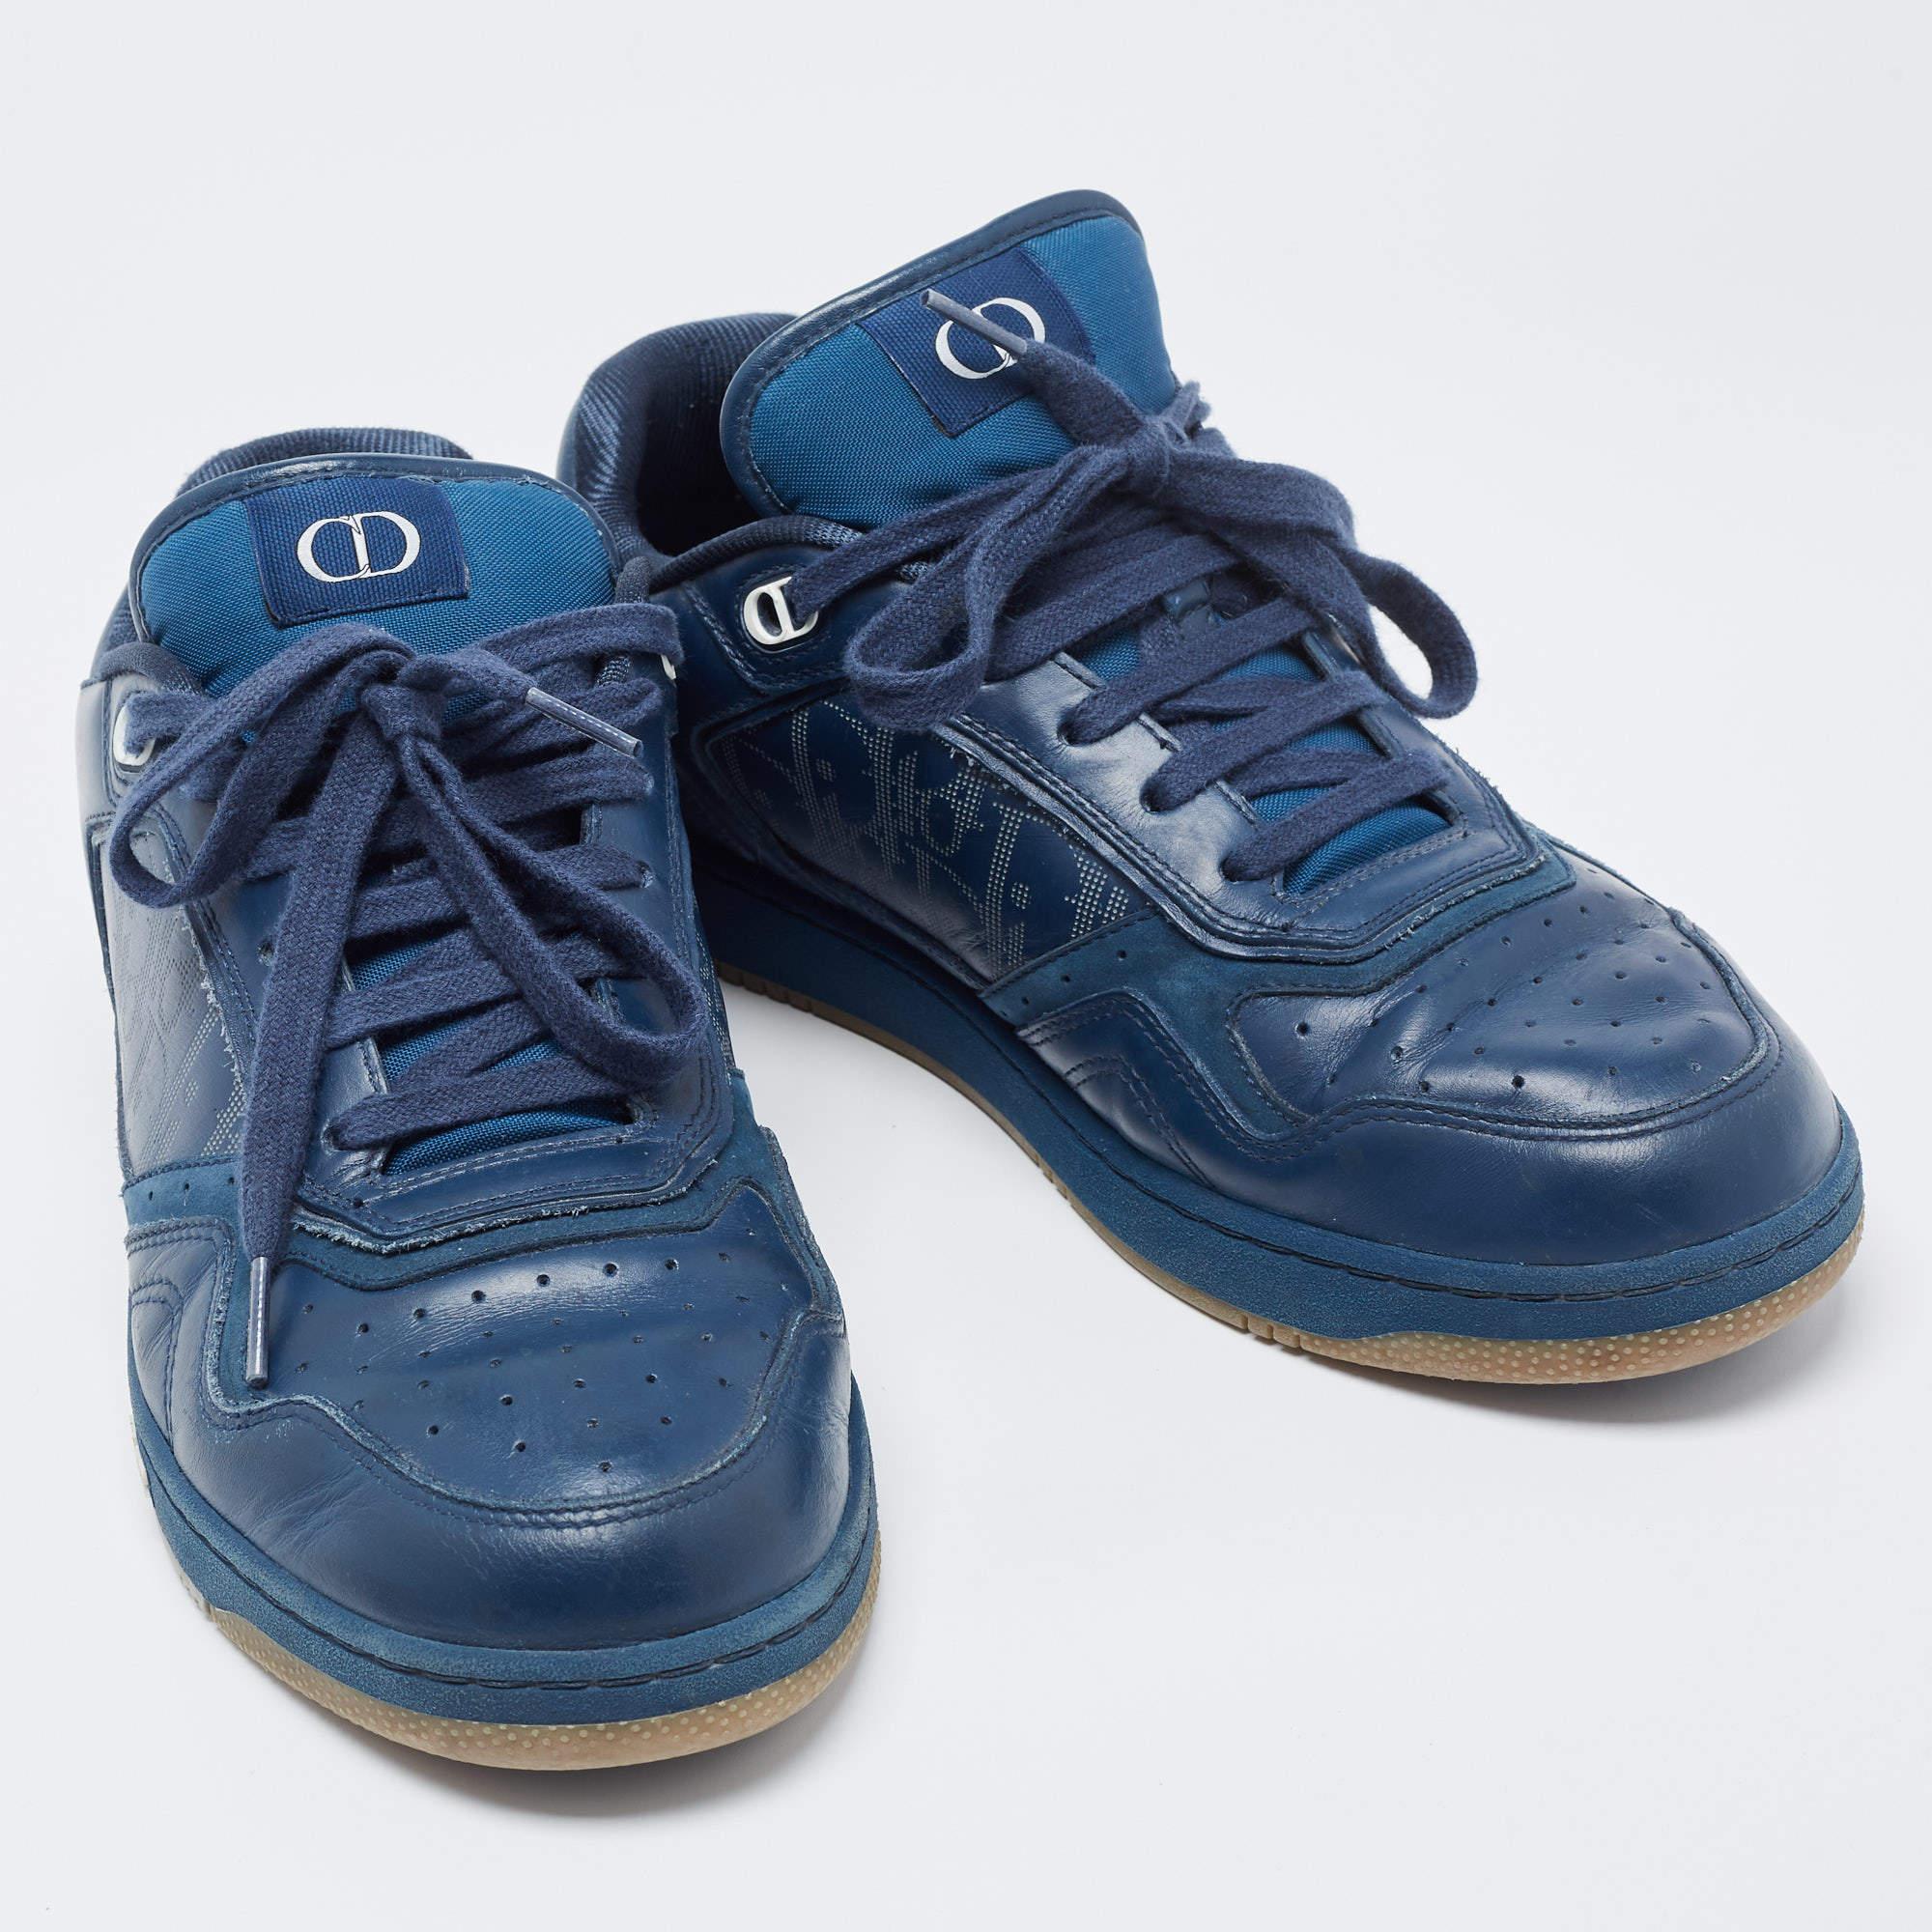 Dior Navy Blue Leather B27 Low Top Sneakers Size 42.5 1